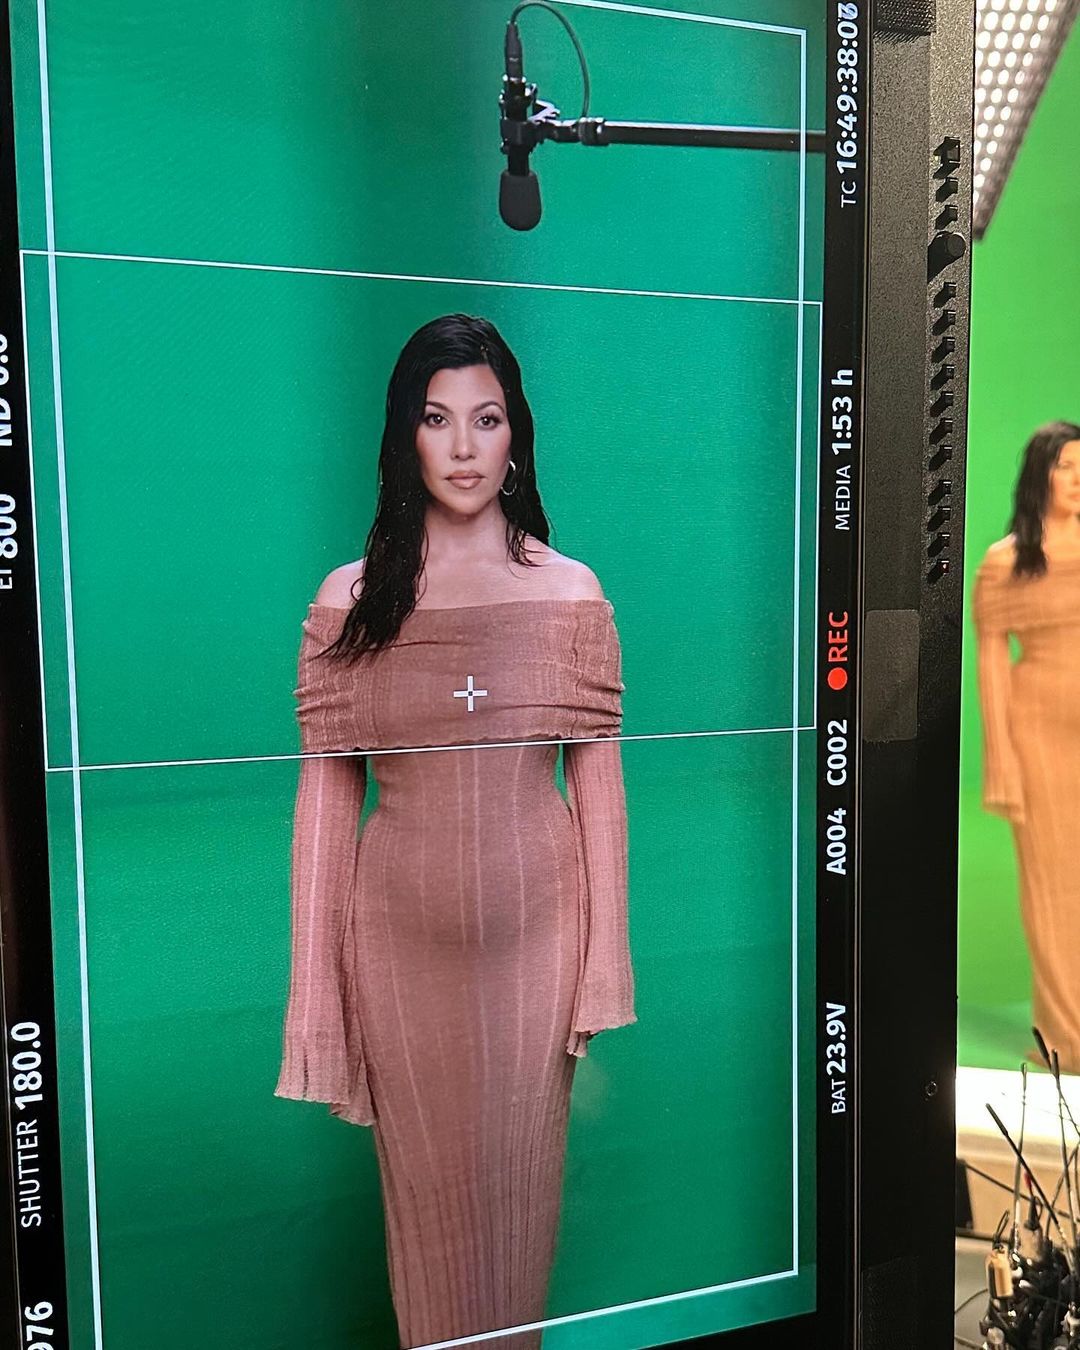 Kourtney shared some behind the scenes photos after returning to work